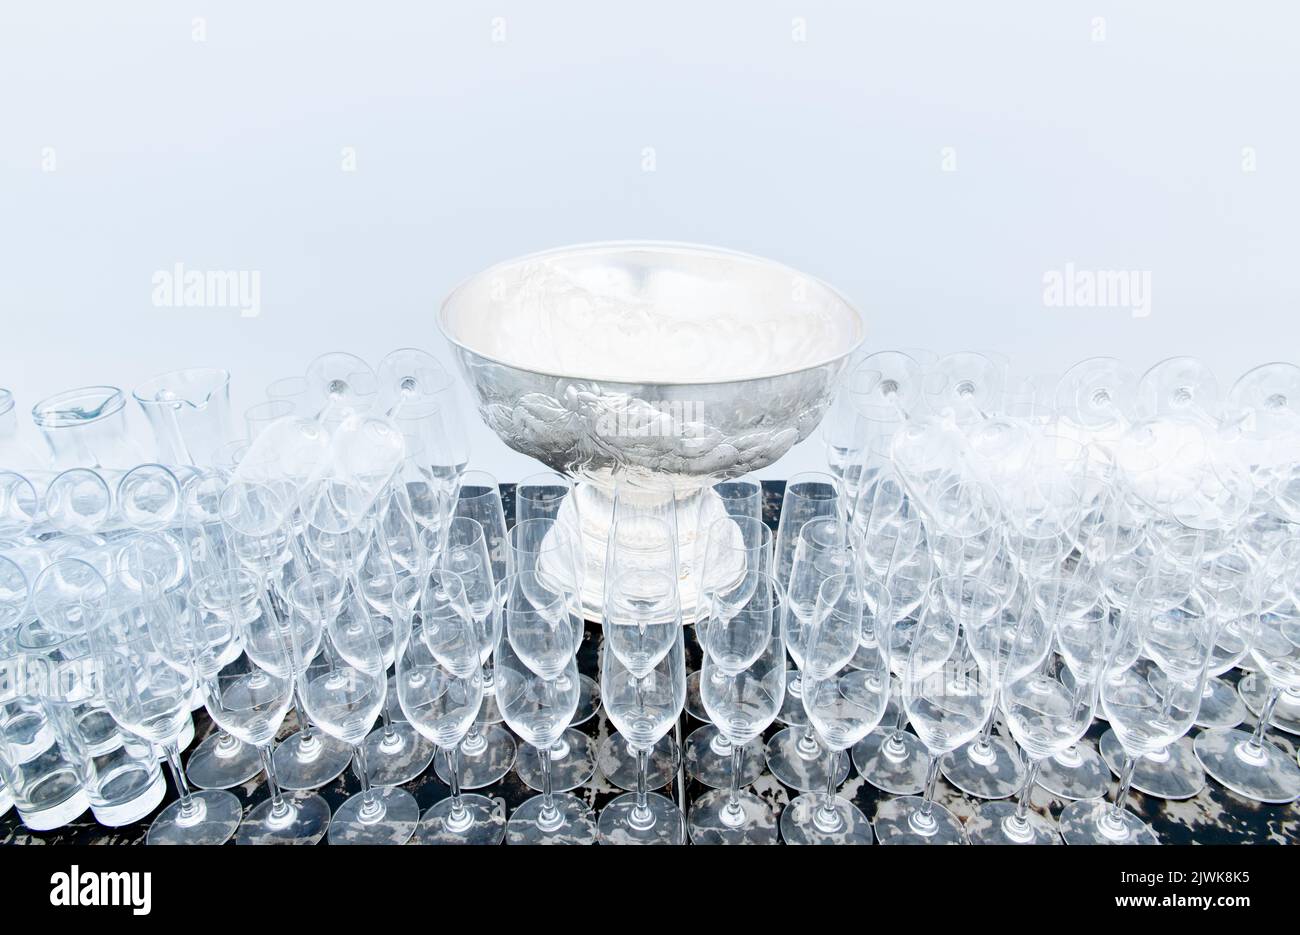 Empty glassware setting on table, glasses aligned ready for party, event, meeting, front view white background Stock Photo